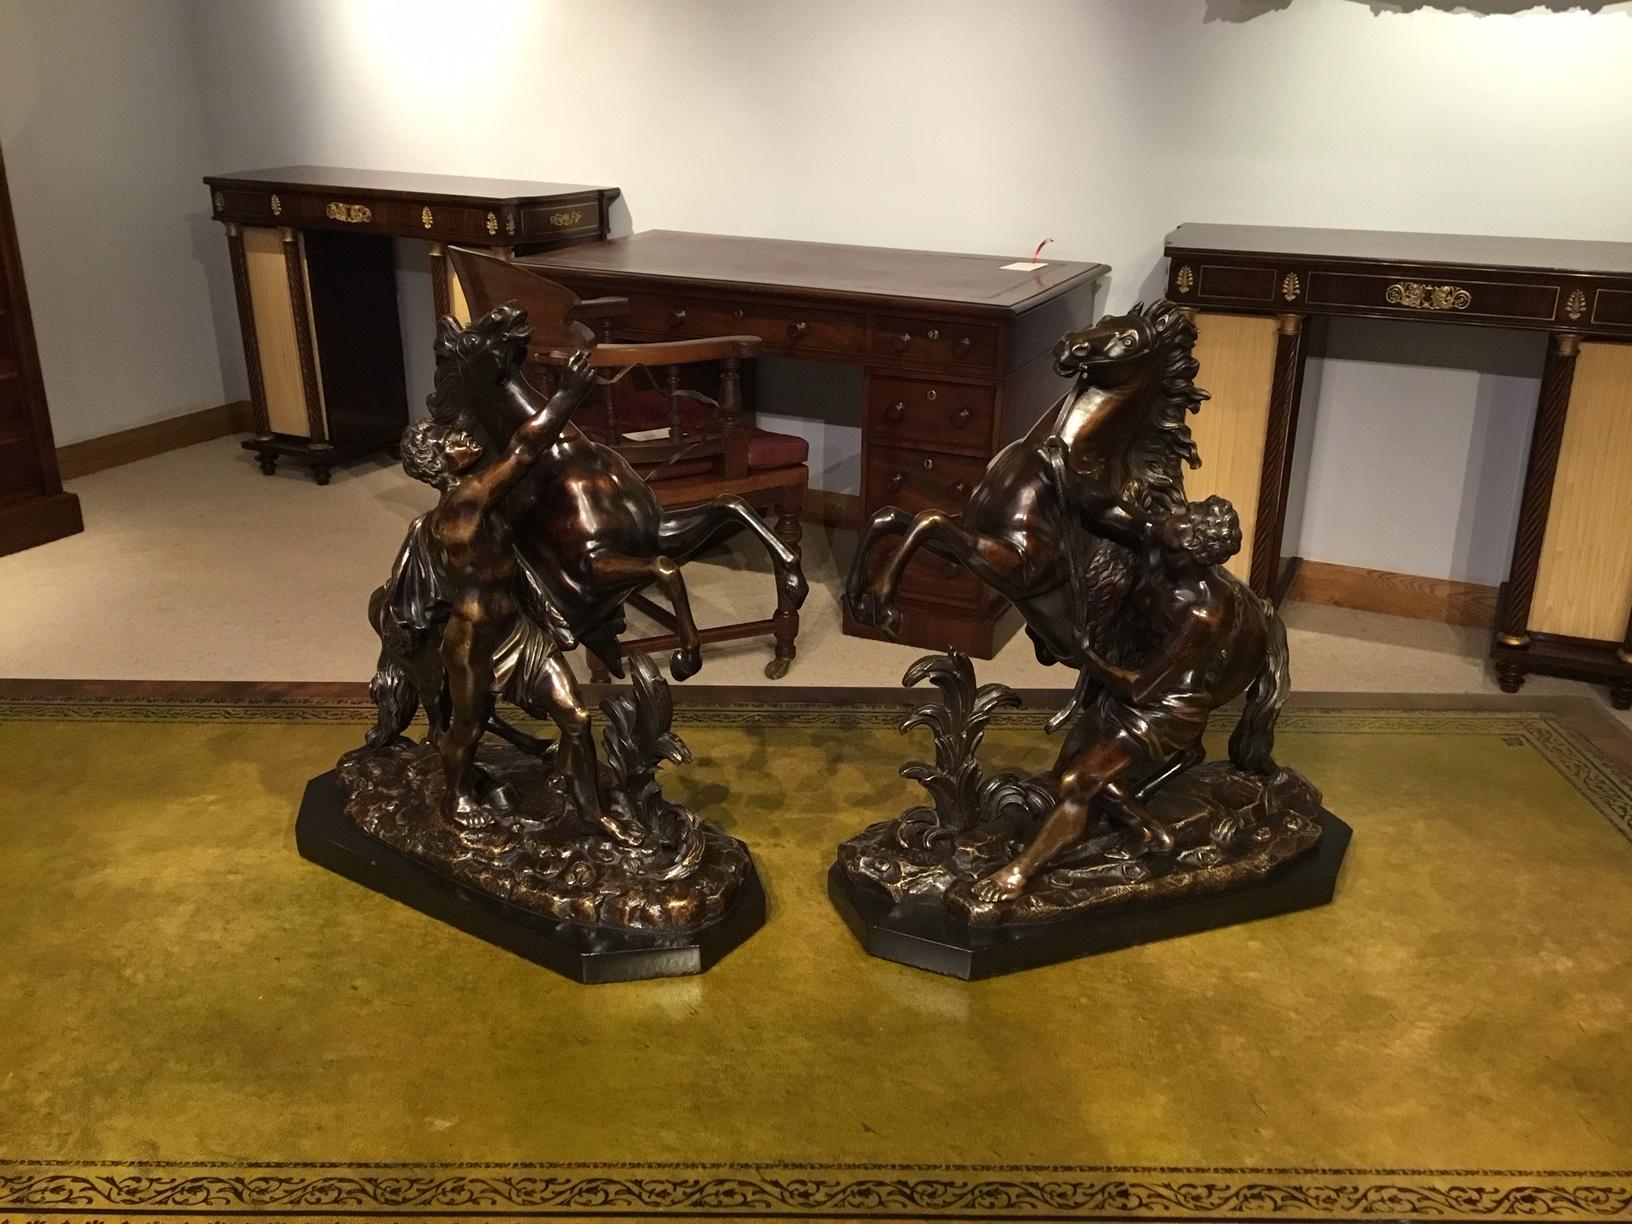 A pair of French Classical 19th century bronze Marley horses after Coustou depicting rearing horses being restrained by a groom. These are 19th Century copies after the antique, circa 1880.

Dimensions: 12